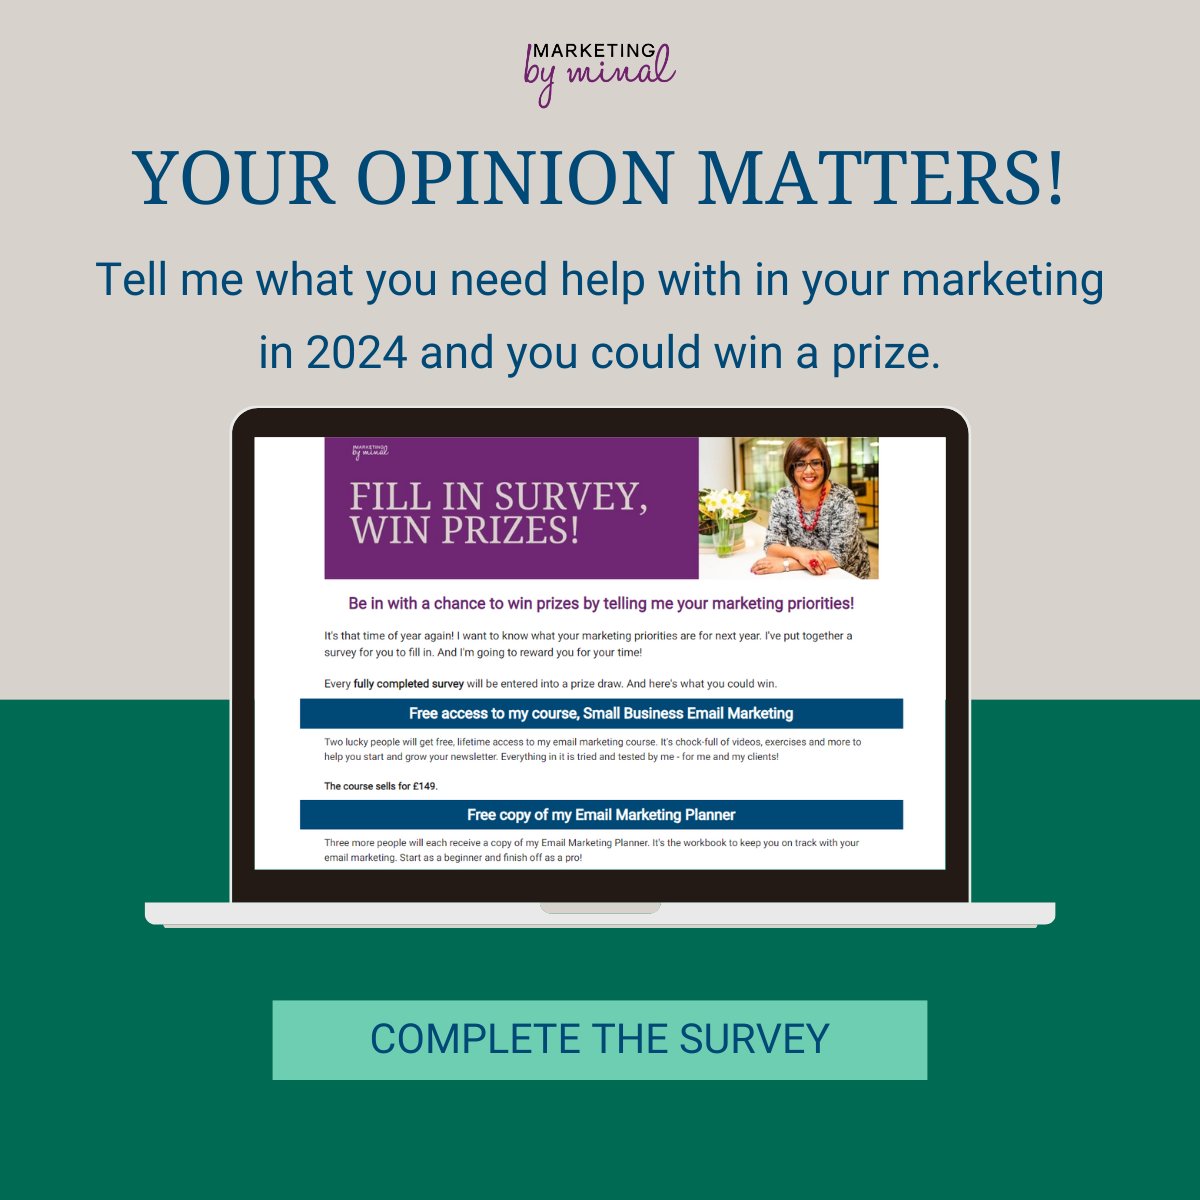 Minal at Marketing by Minal (@Minal2804) wants to know what your marketing priorities are for 2024. Fill in her short survey and you could win prizes to set your business up for next year! lp.constantcontactpages.com/cu/Y14ZbNa